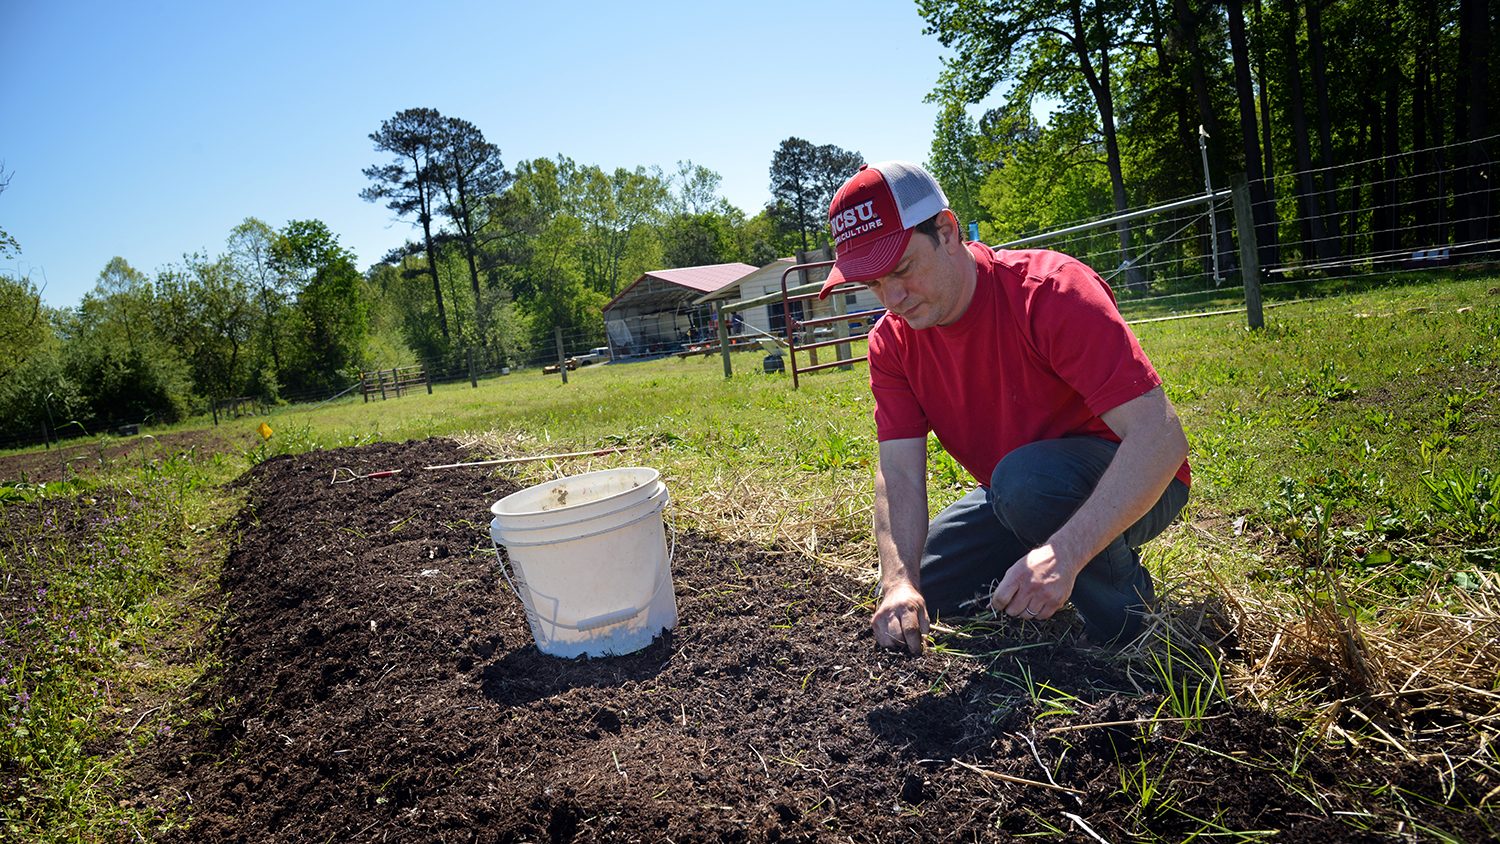 Soil sciences student weeds his section of garden at the Agroecology Farm.